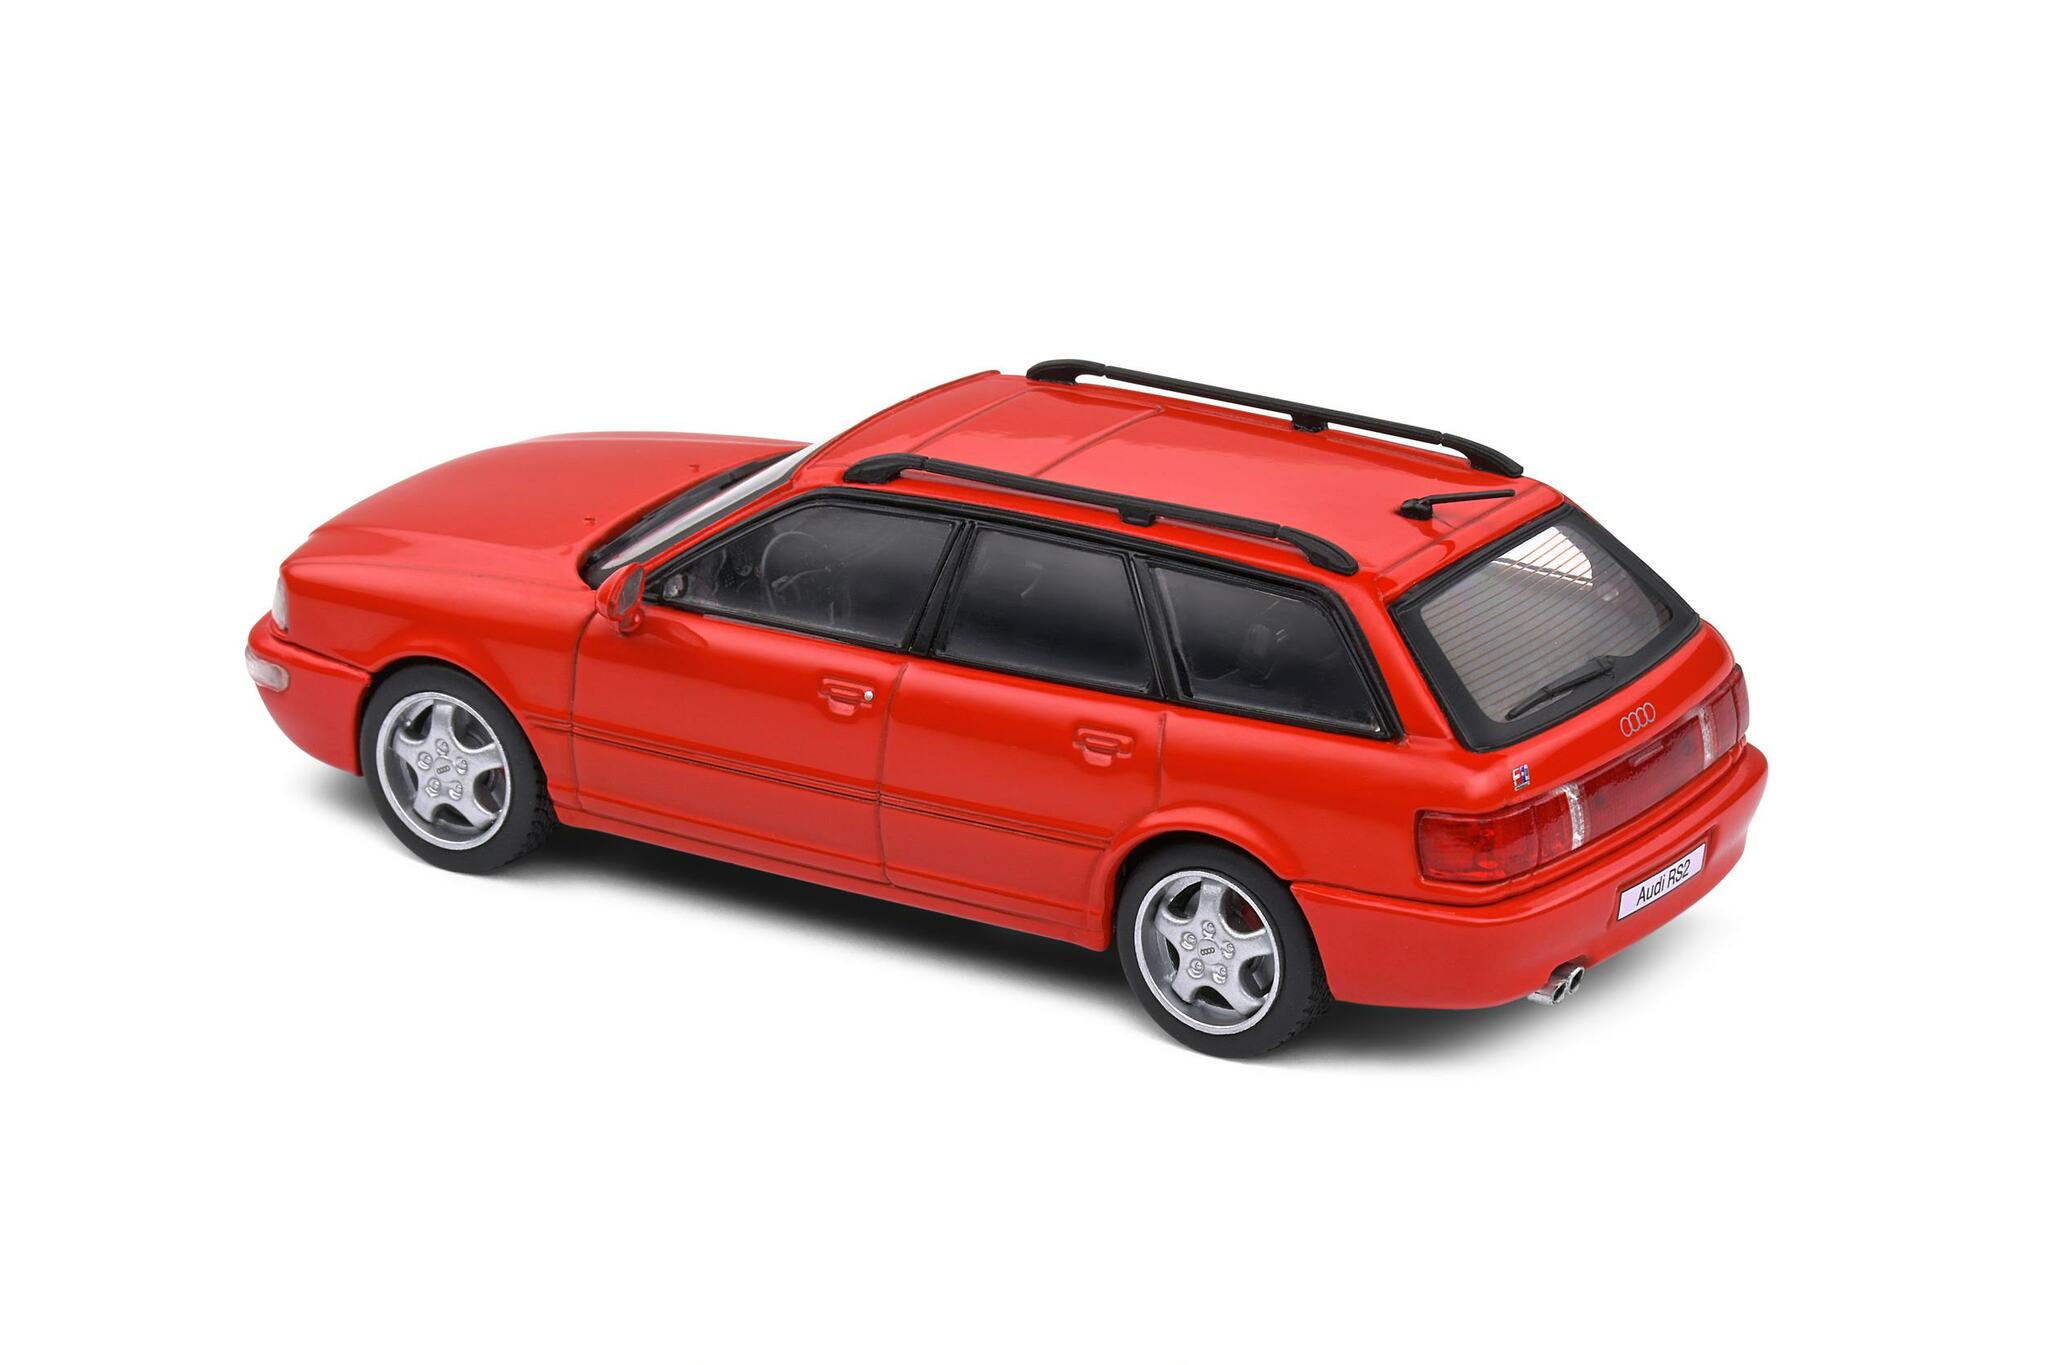 Skala 1/43 Audi Avant RS2 1995, Powered by Porsche, Red fr Solido